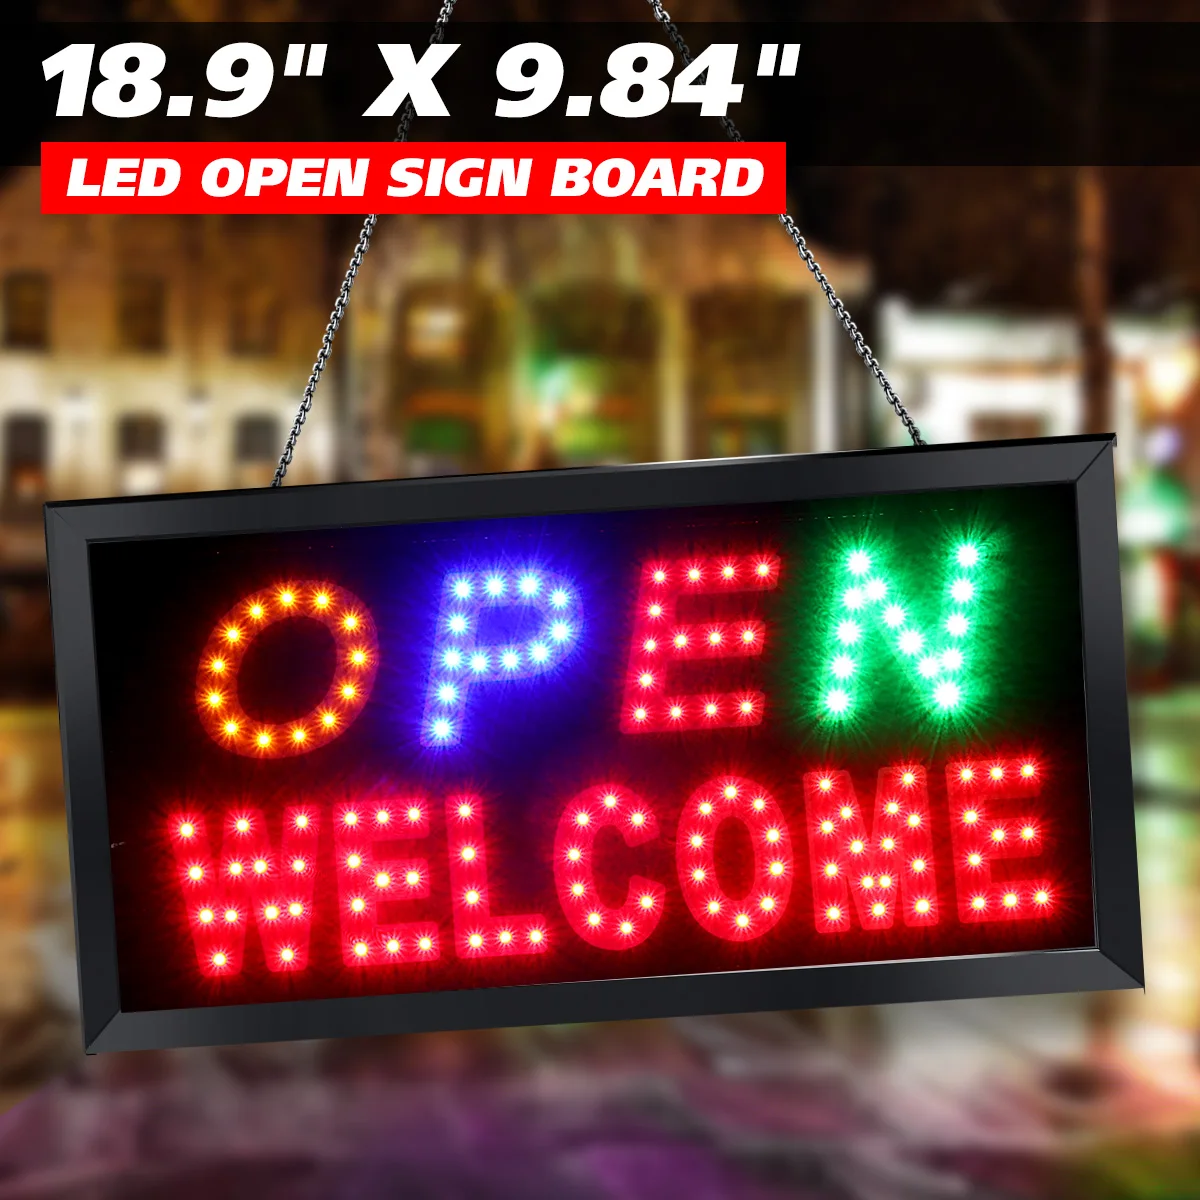 

LED Luminous Sign Store Advertising Open Billboards Light Signs Display Shopping Scrolling Mall Projector Neon Light Boards